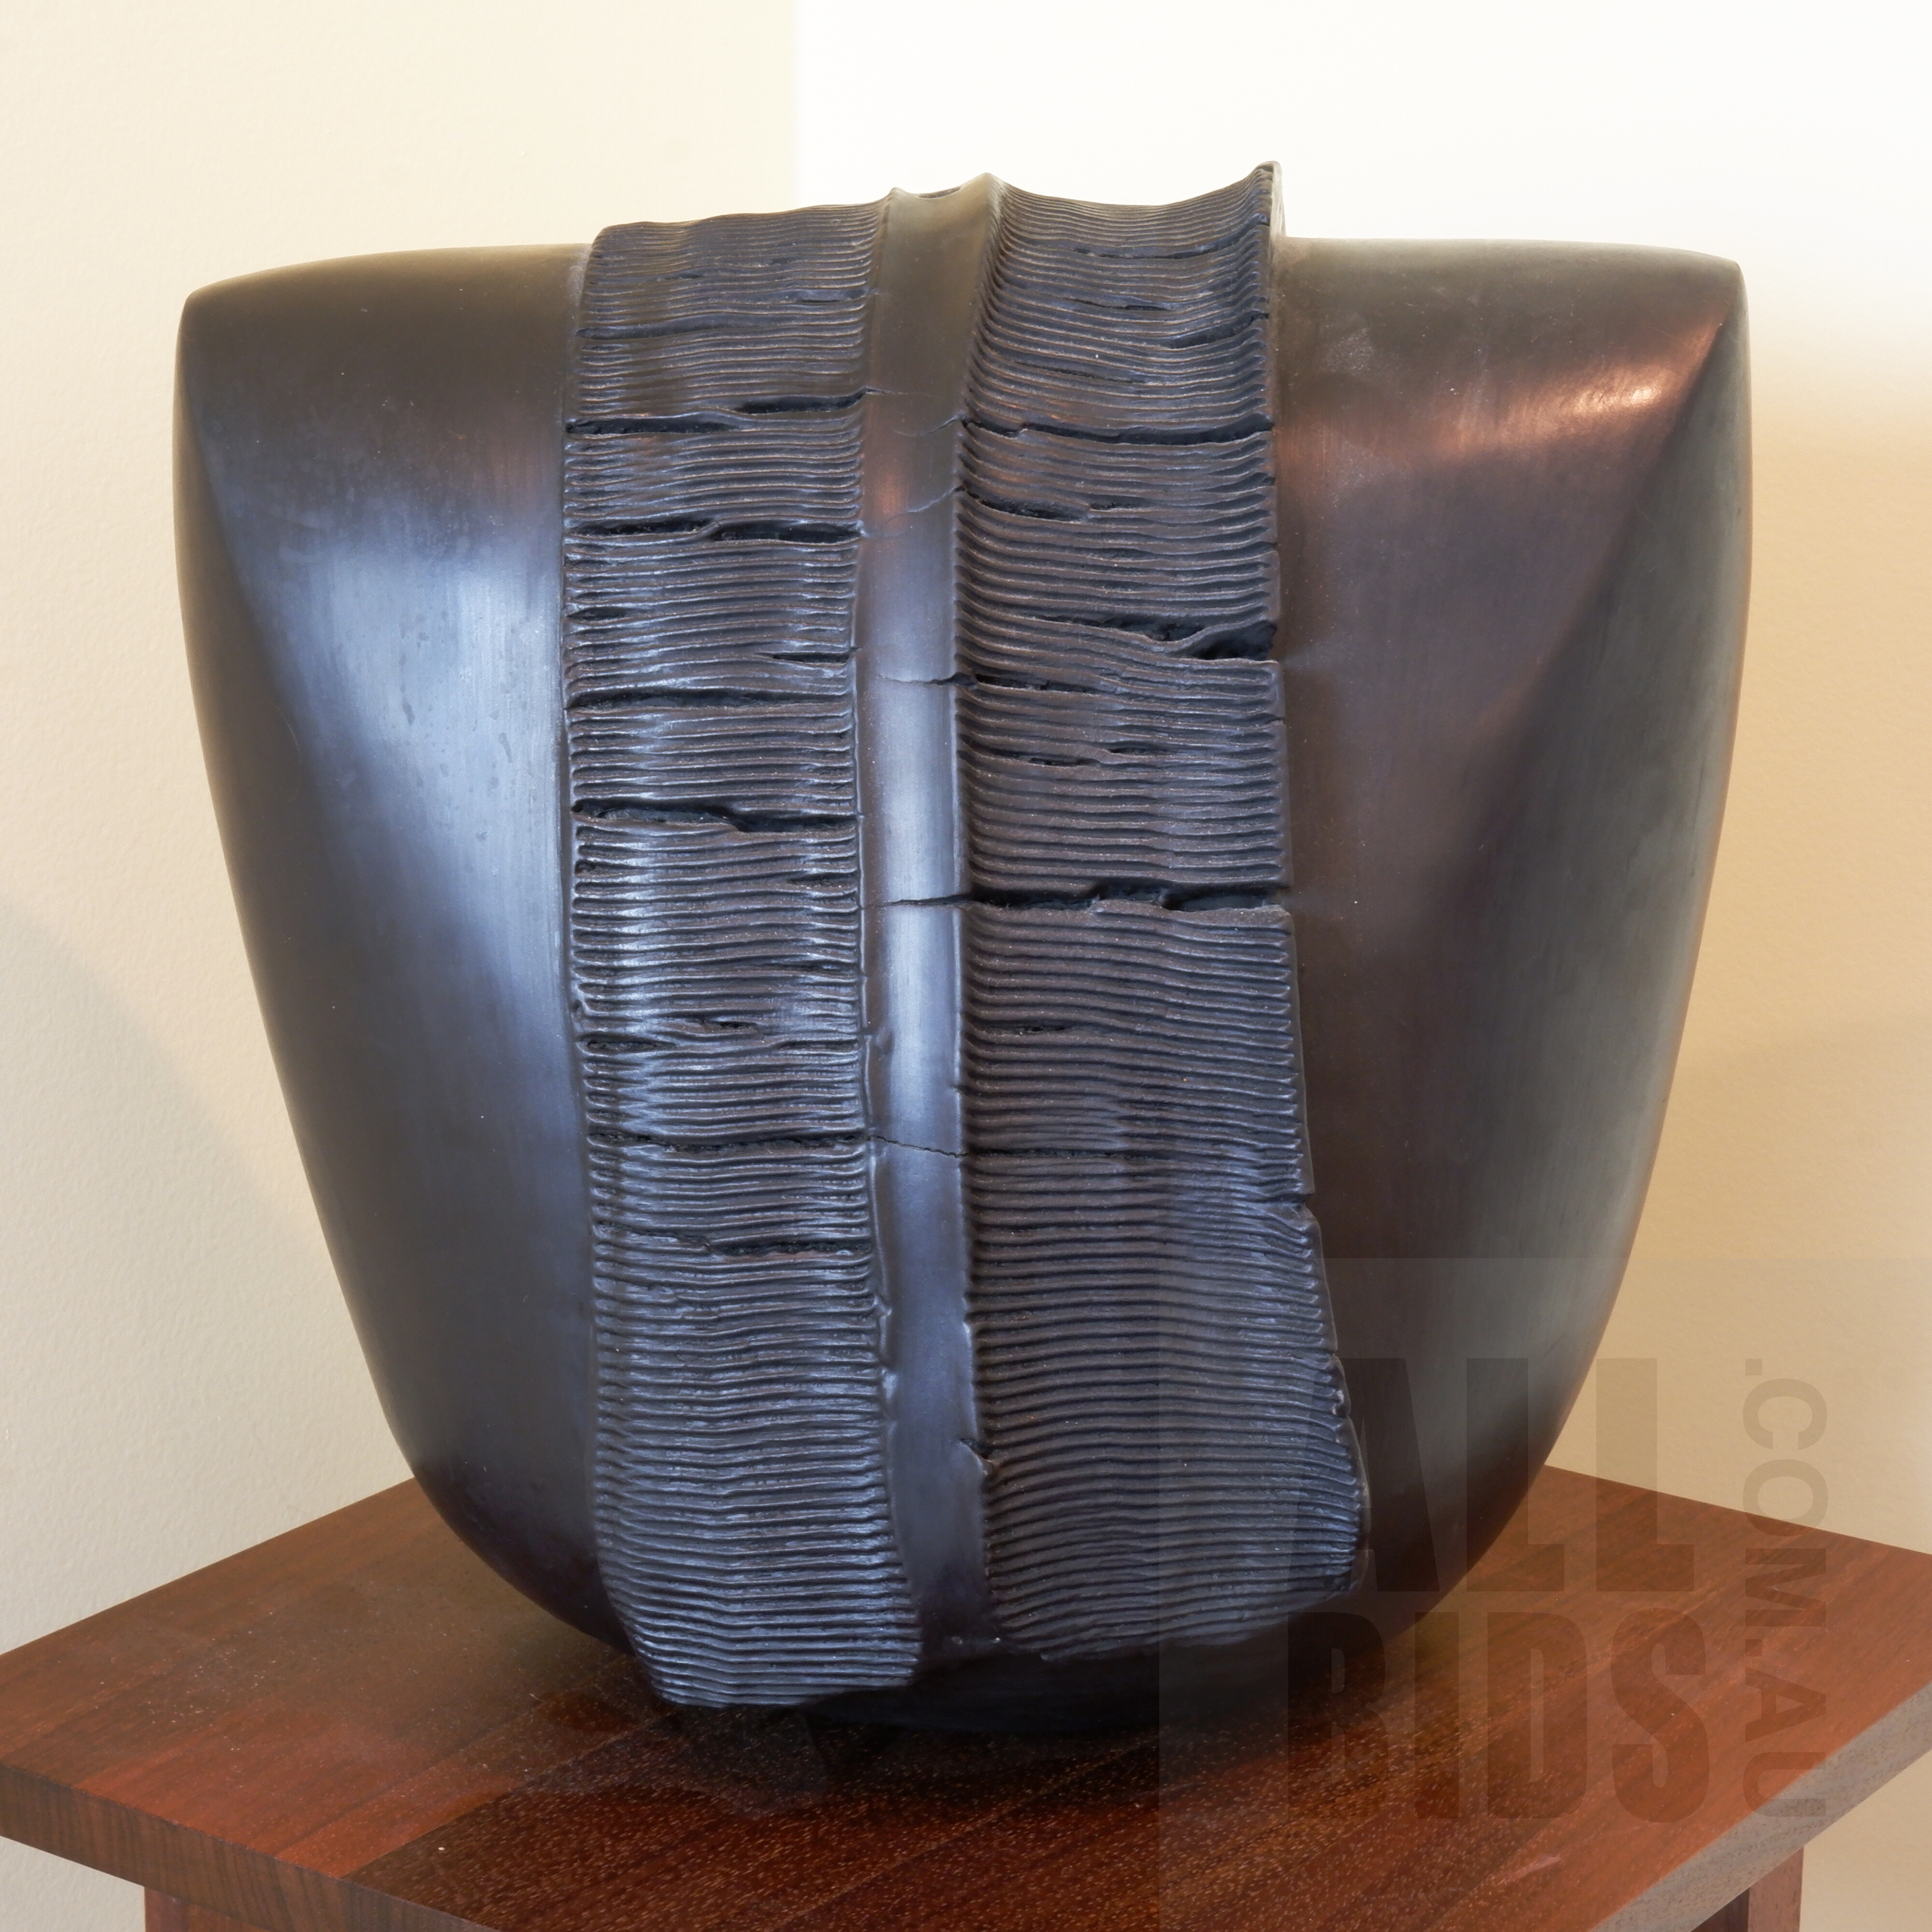 'Peter Petruccelli (1934-2013) Black Form, Ceramic, From the 1987 Language of Form Exhibition'